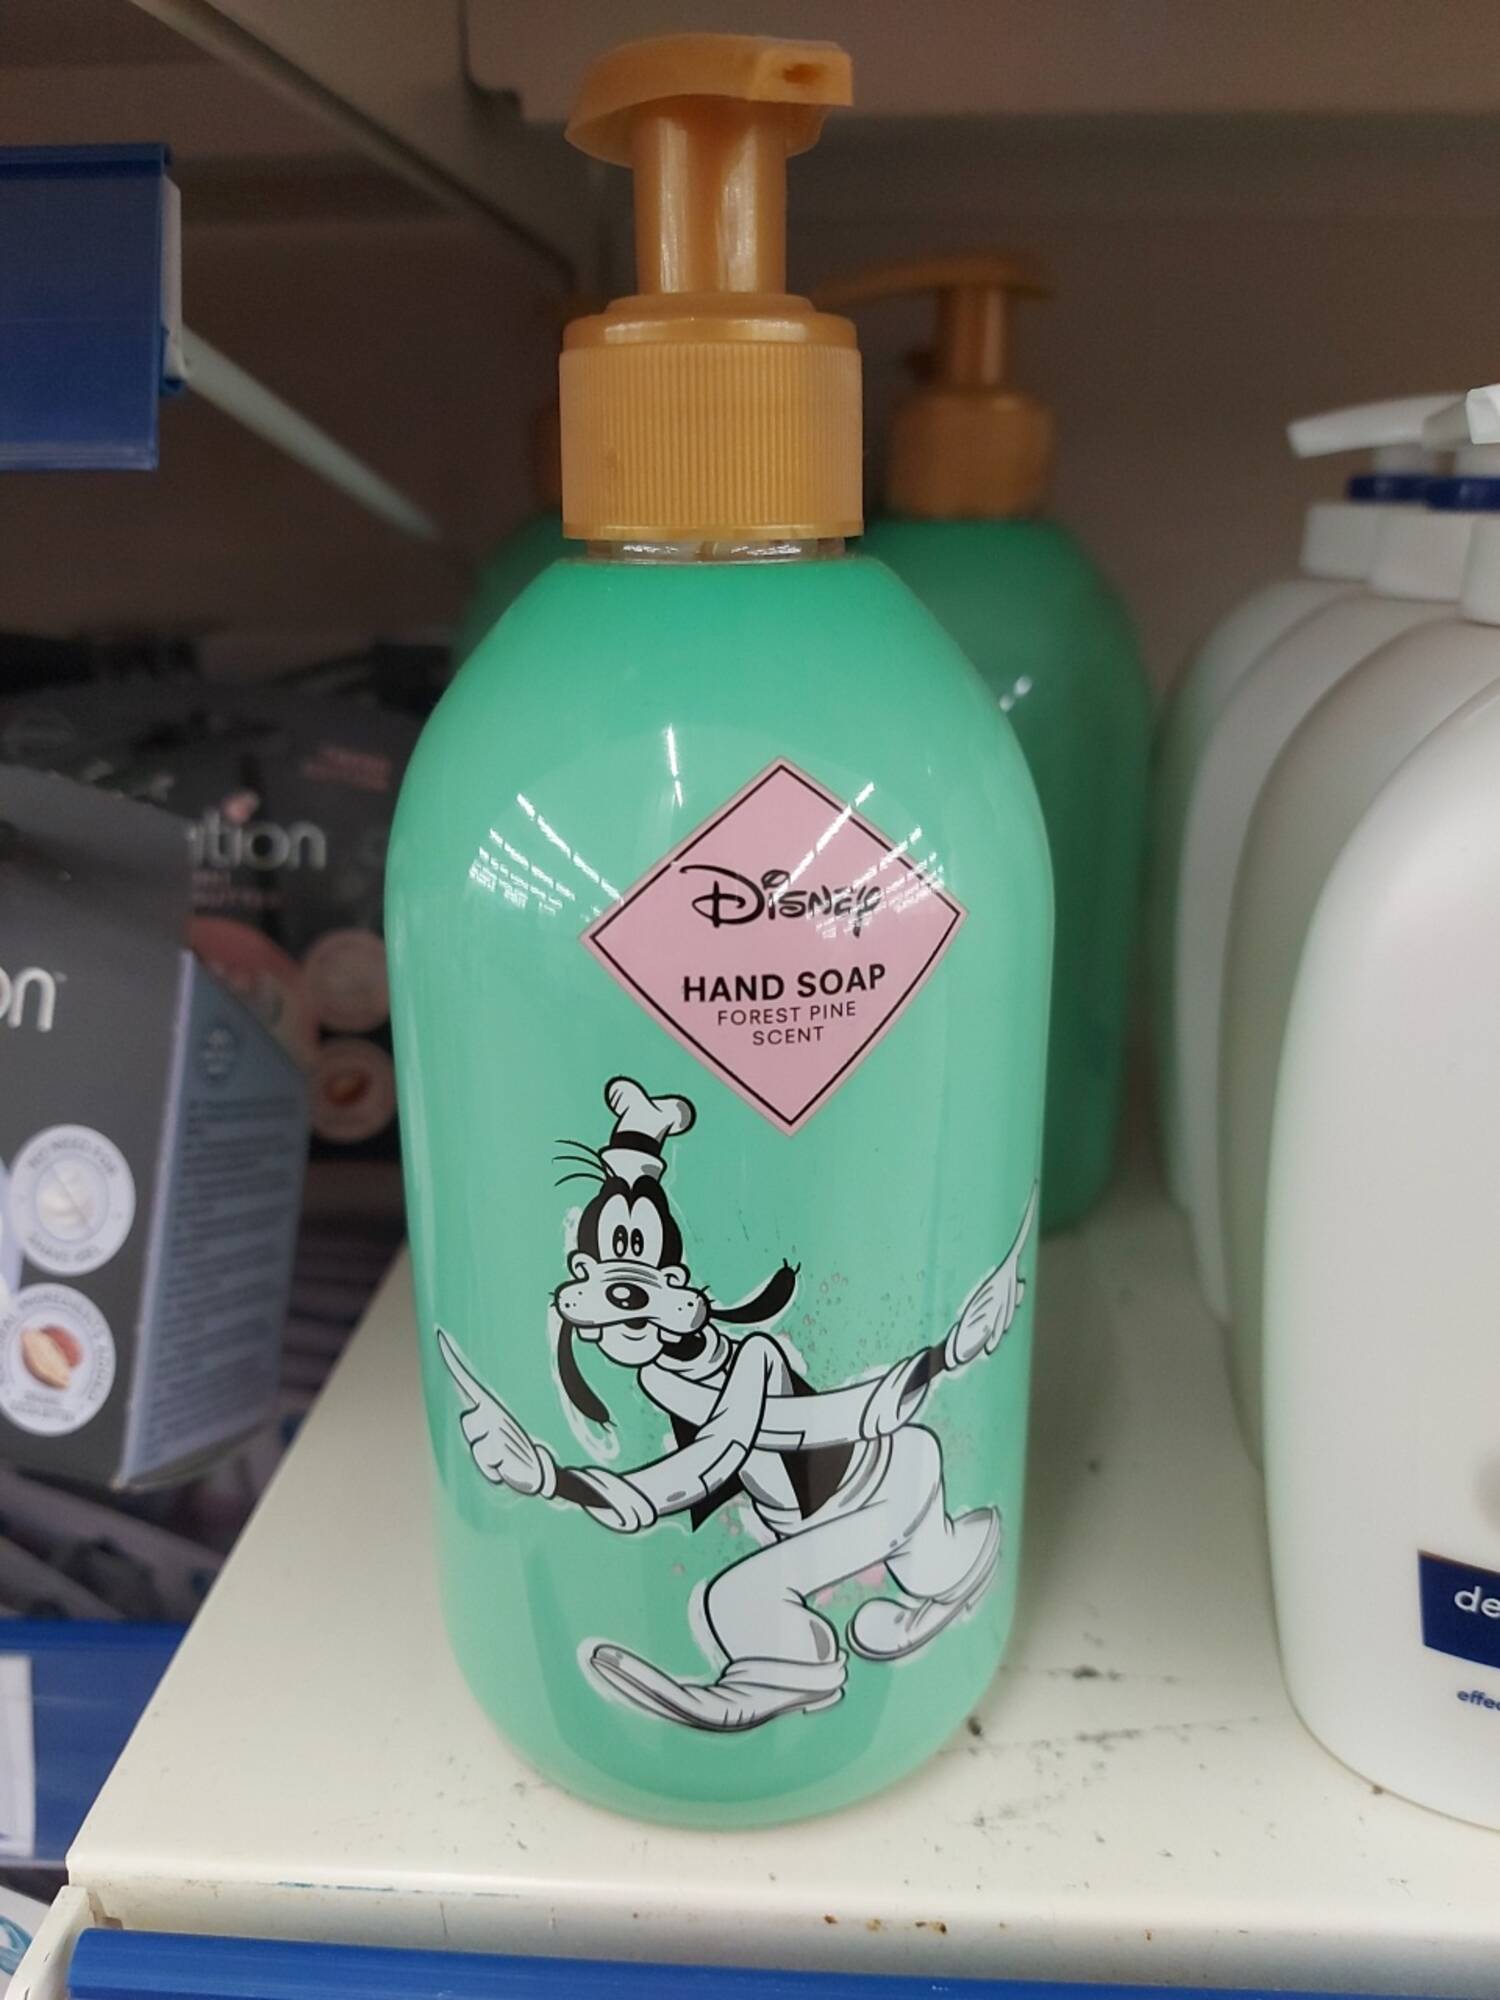 DISNEY - Hand soap forest pine scent